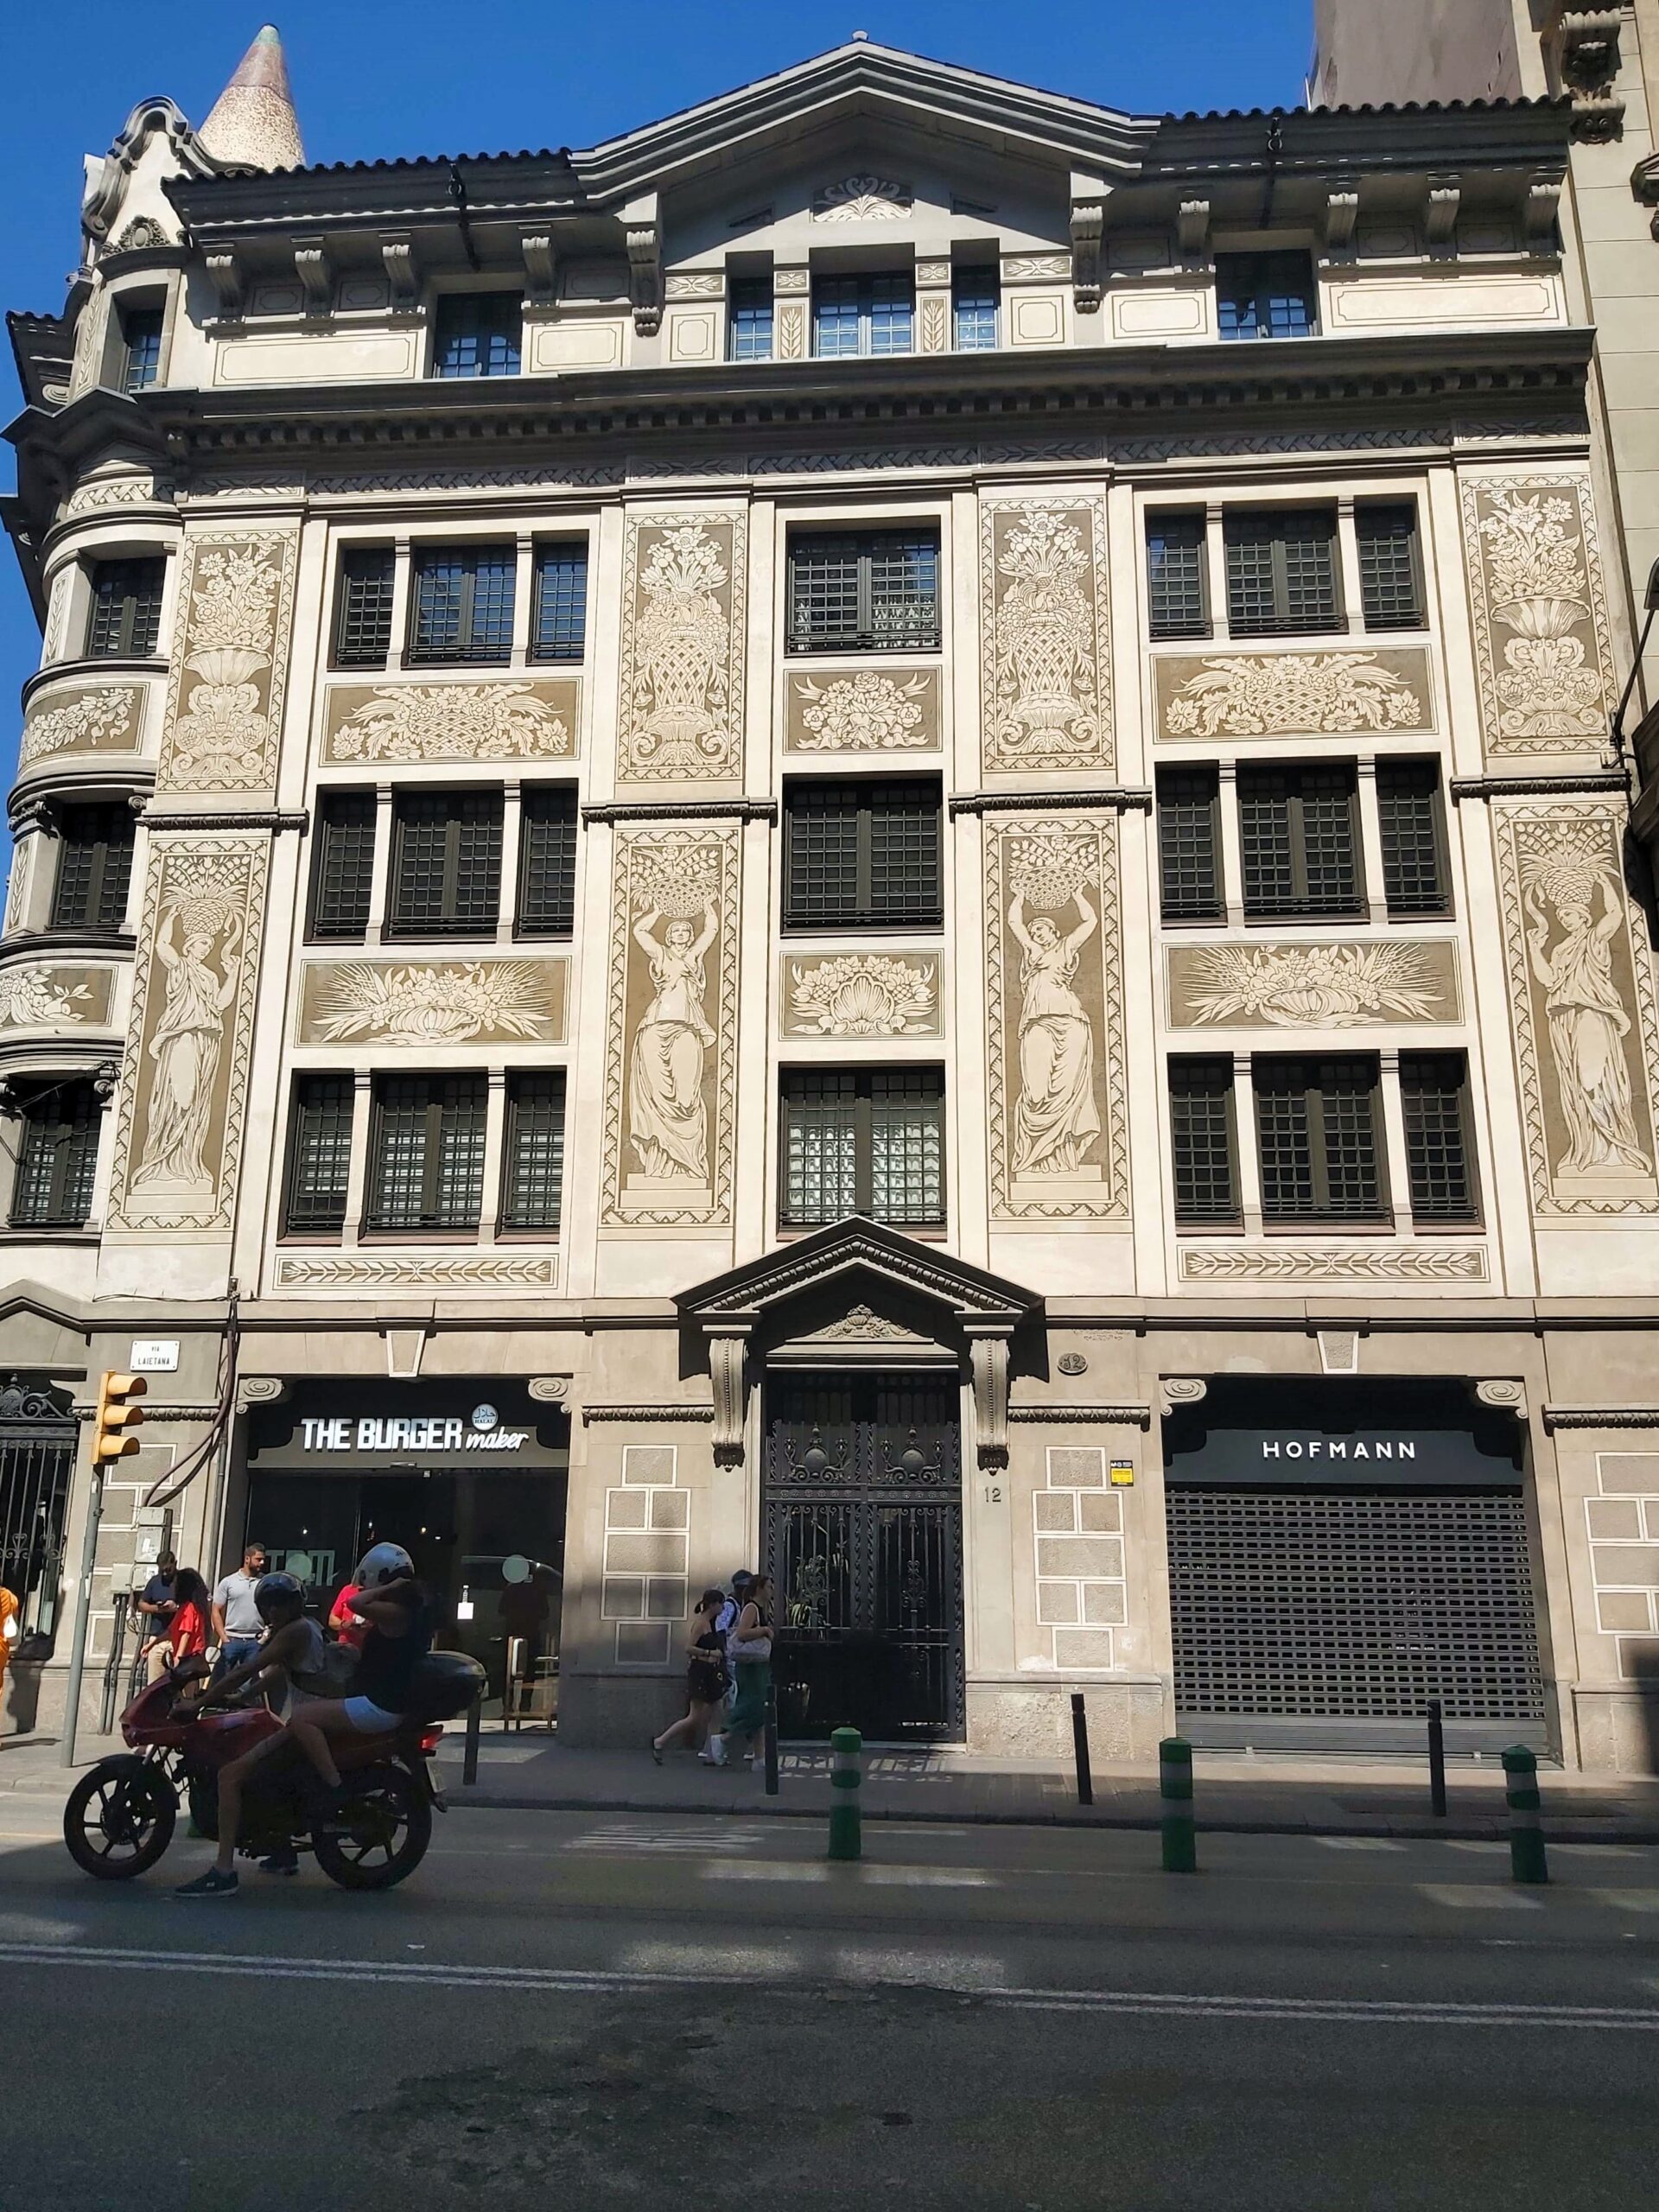 Building with frescoes on in Barcelona, Spain